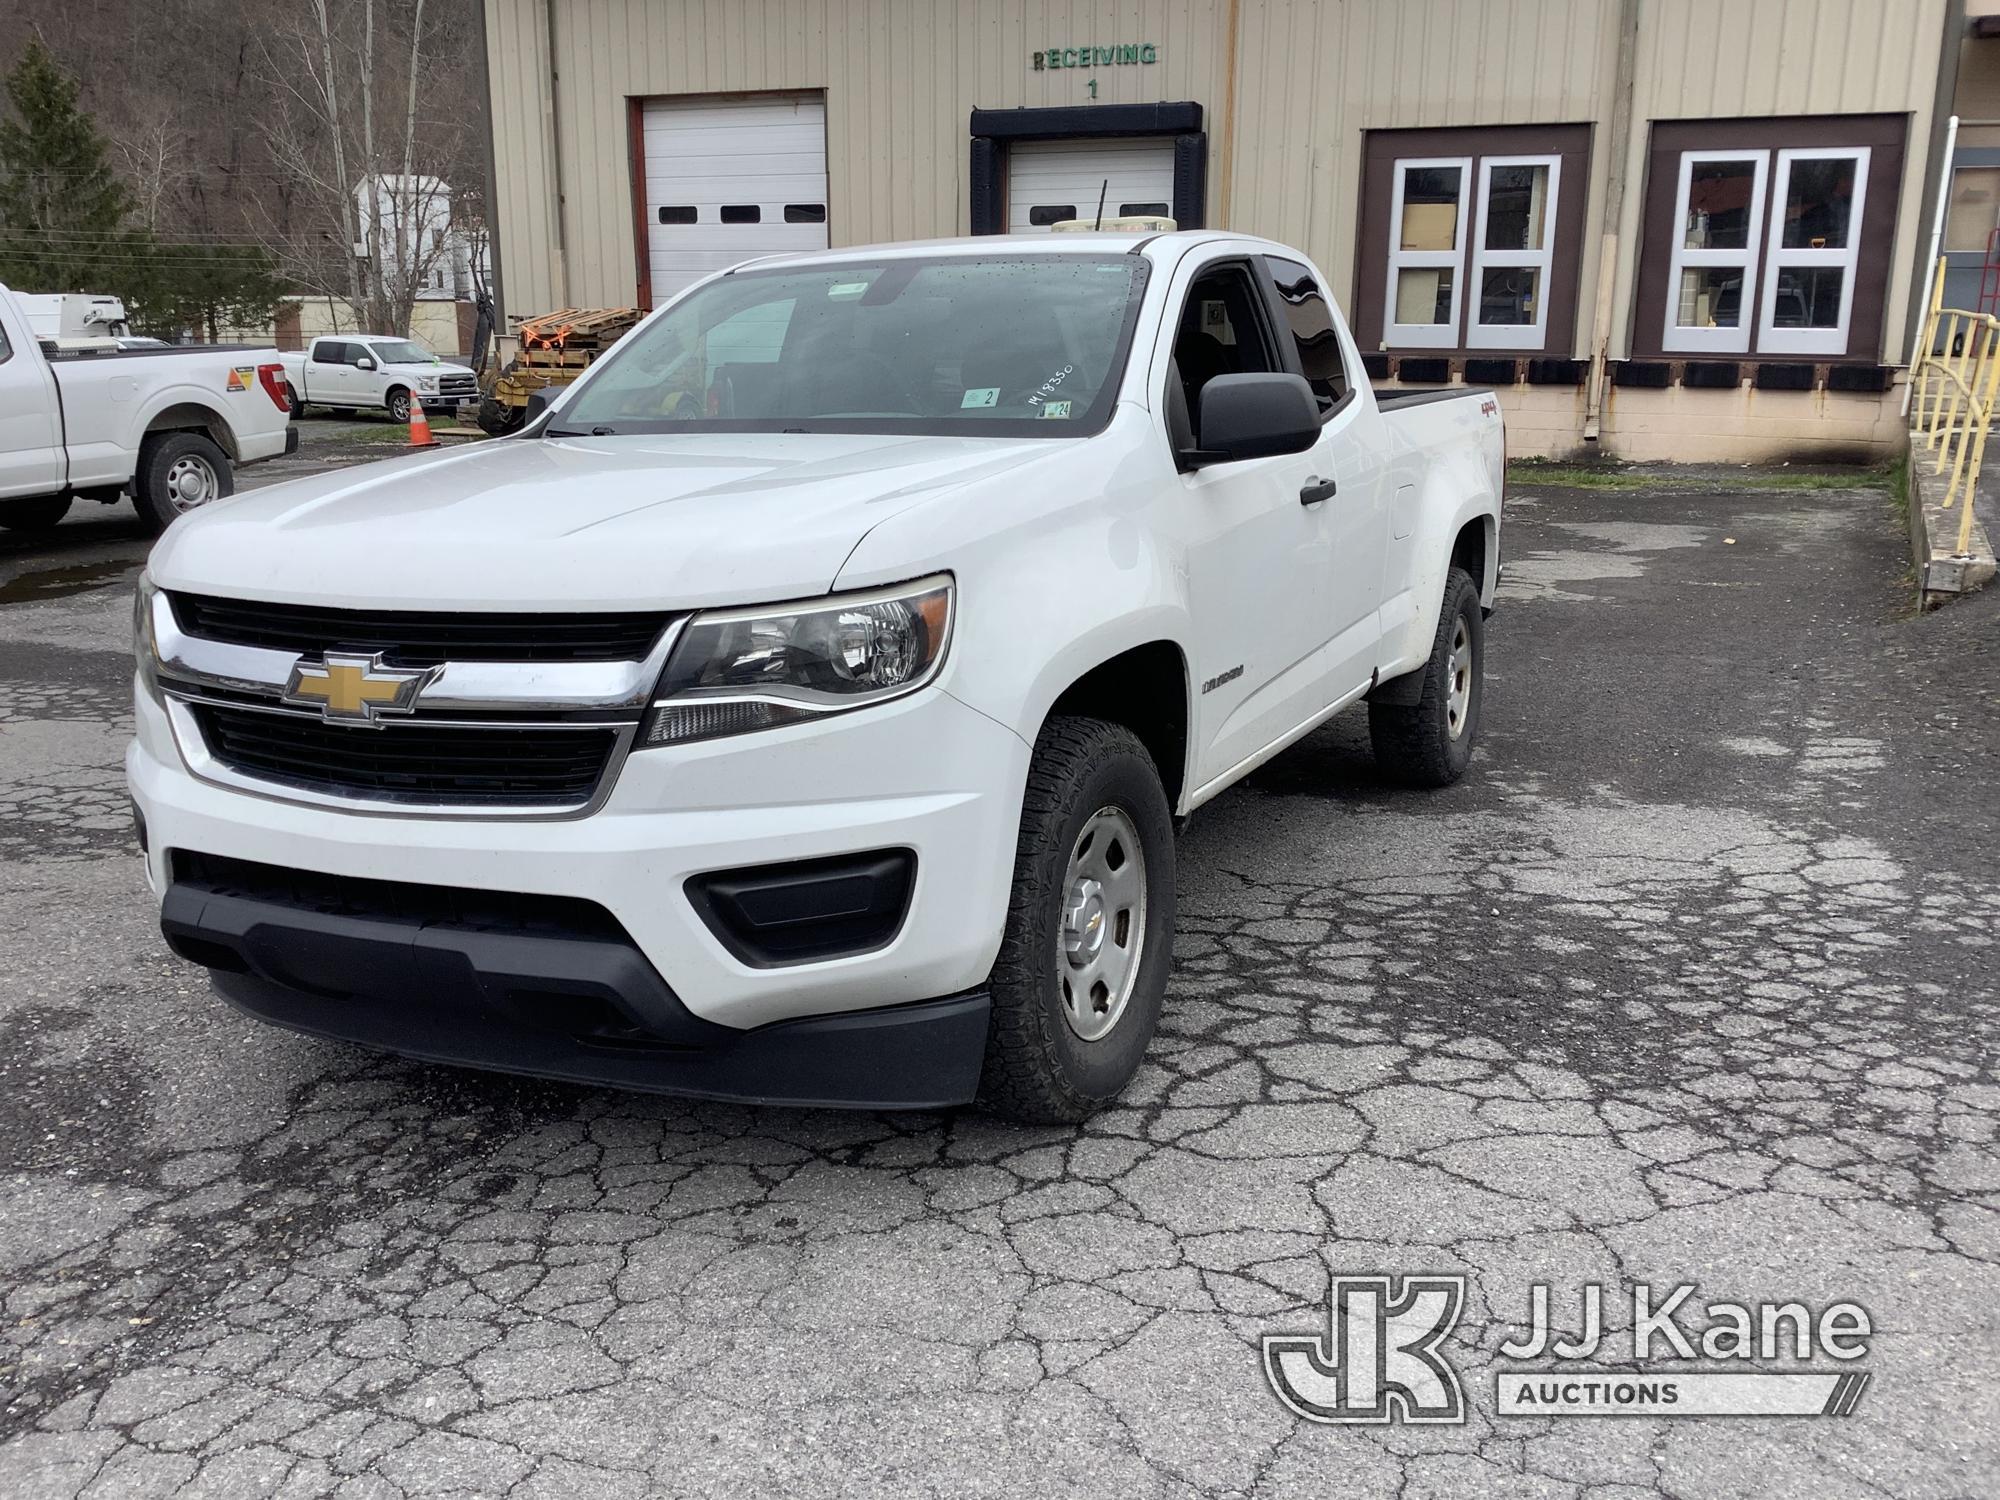 (Cumberland, MD) 2016 Chevrolet Colorado 4x4 Extended-Cab Pickup Truck Runs & Moves, Rust & Body Dam